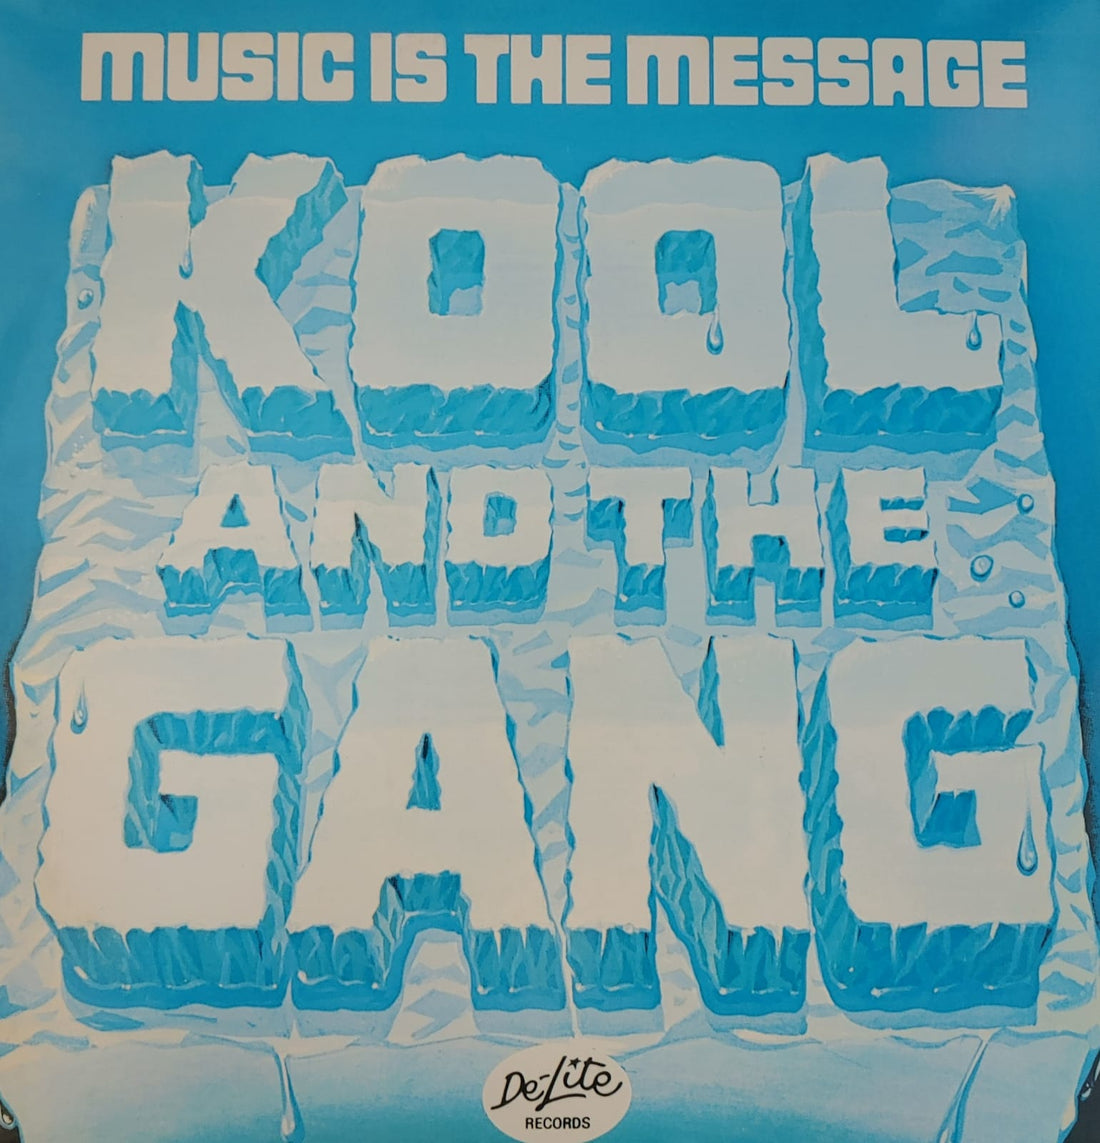 Kool & The Gang- Music Is The Message